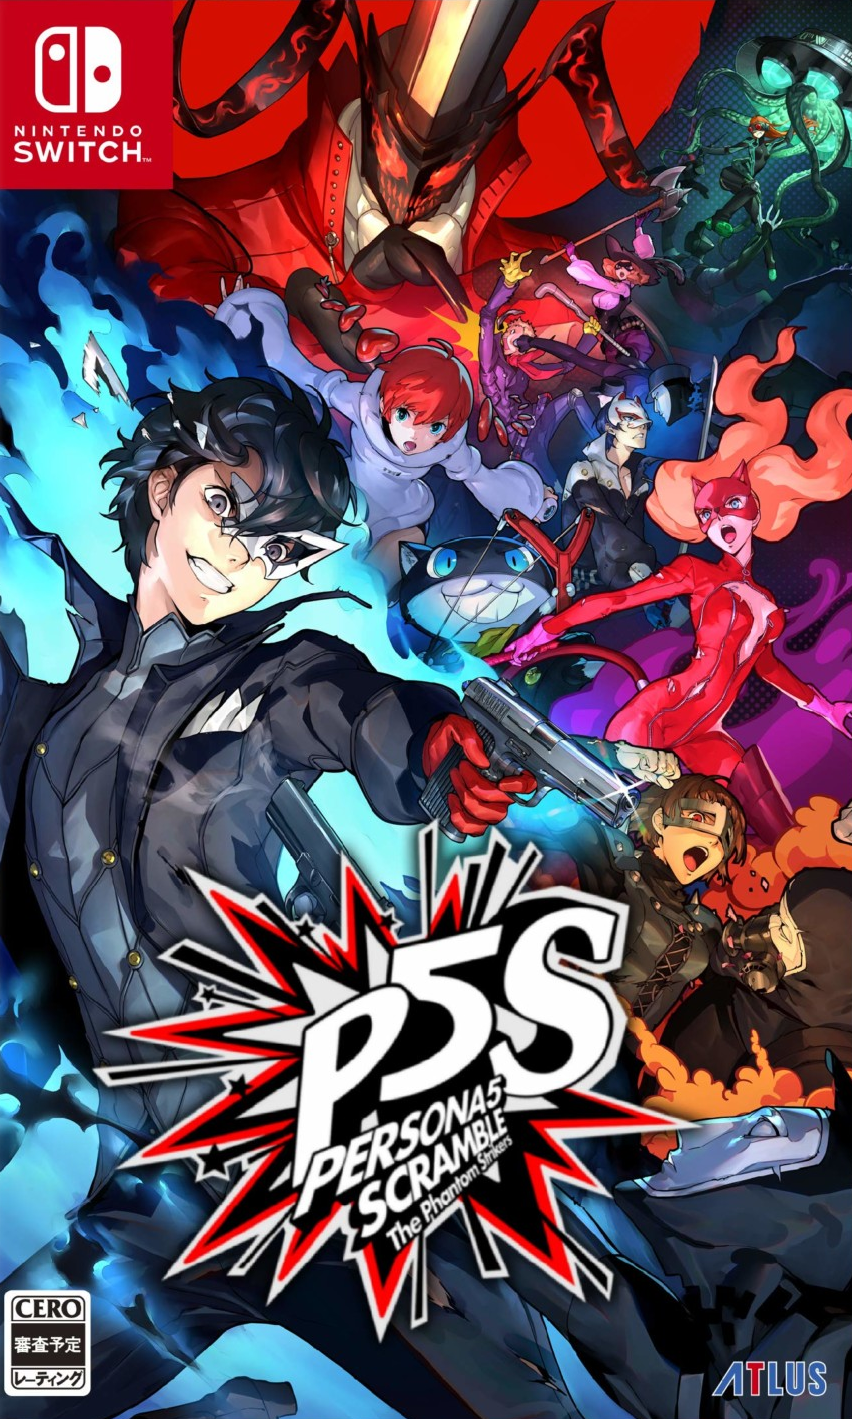 Persona 5 Strikers Goldberg - Persona 5 Strikers' Sequel Role Explained | Game Rant : Persona 5 ...